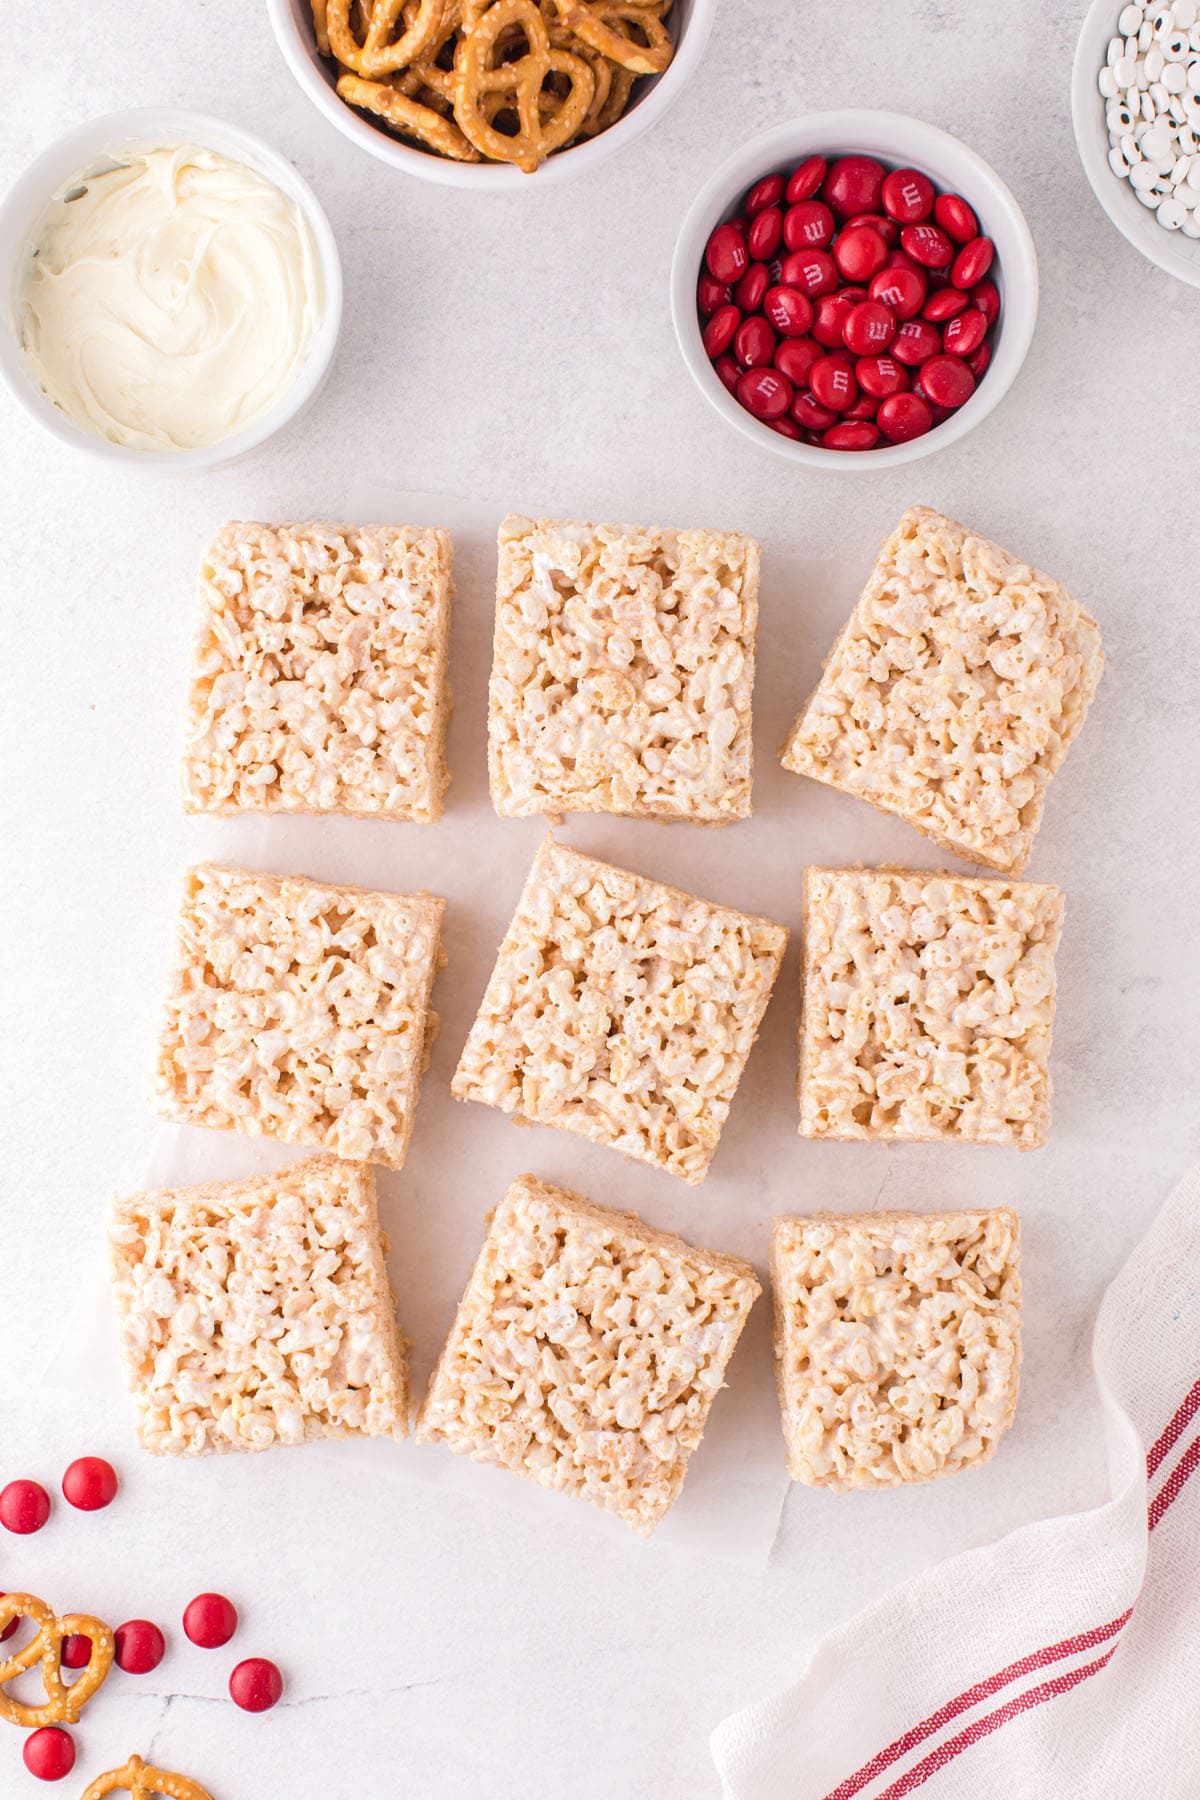 Cut the Rice Krispies treats into 2x3 inch rectangles